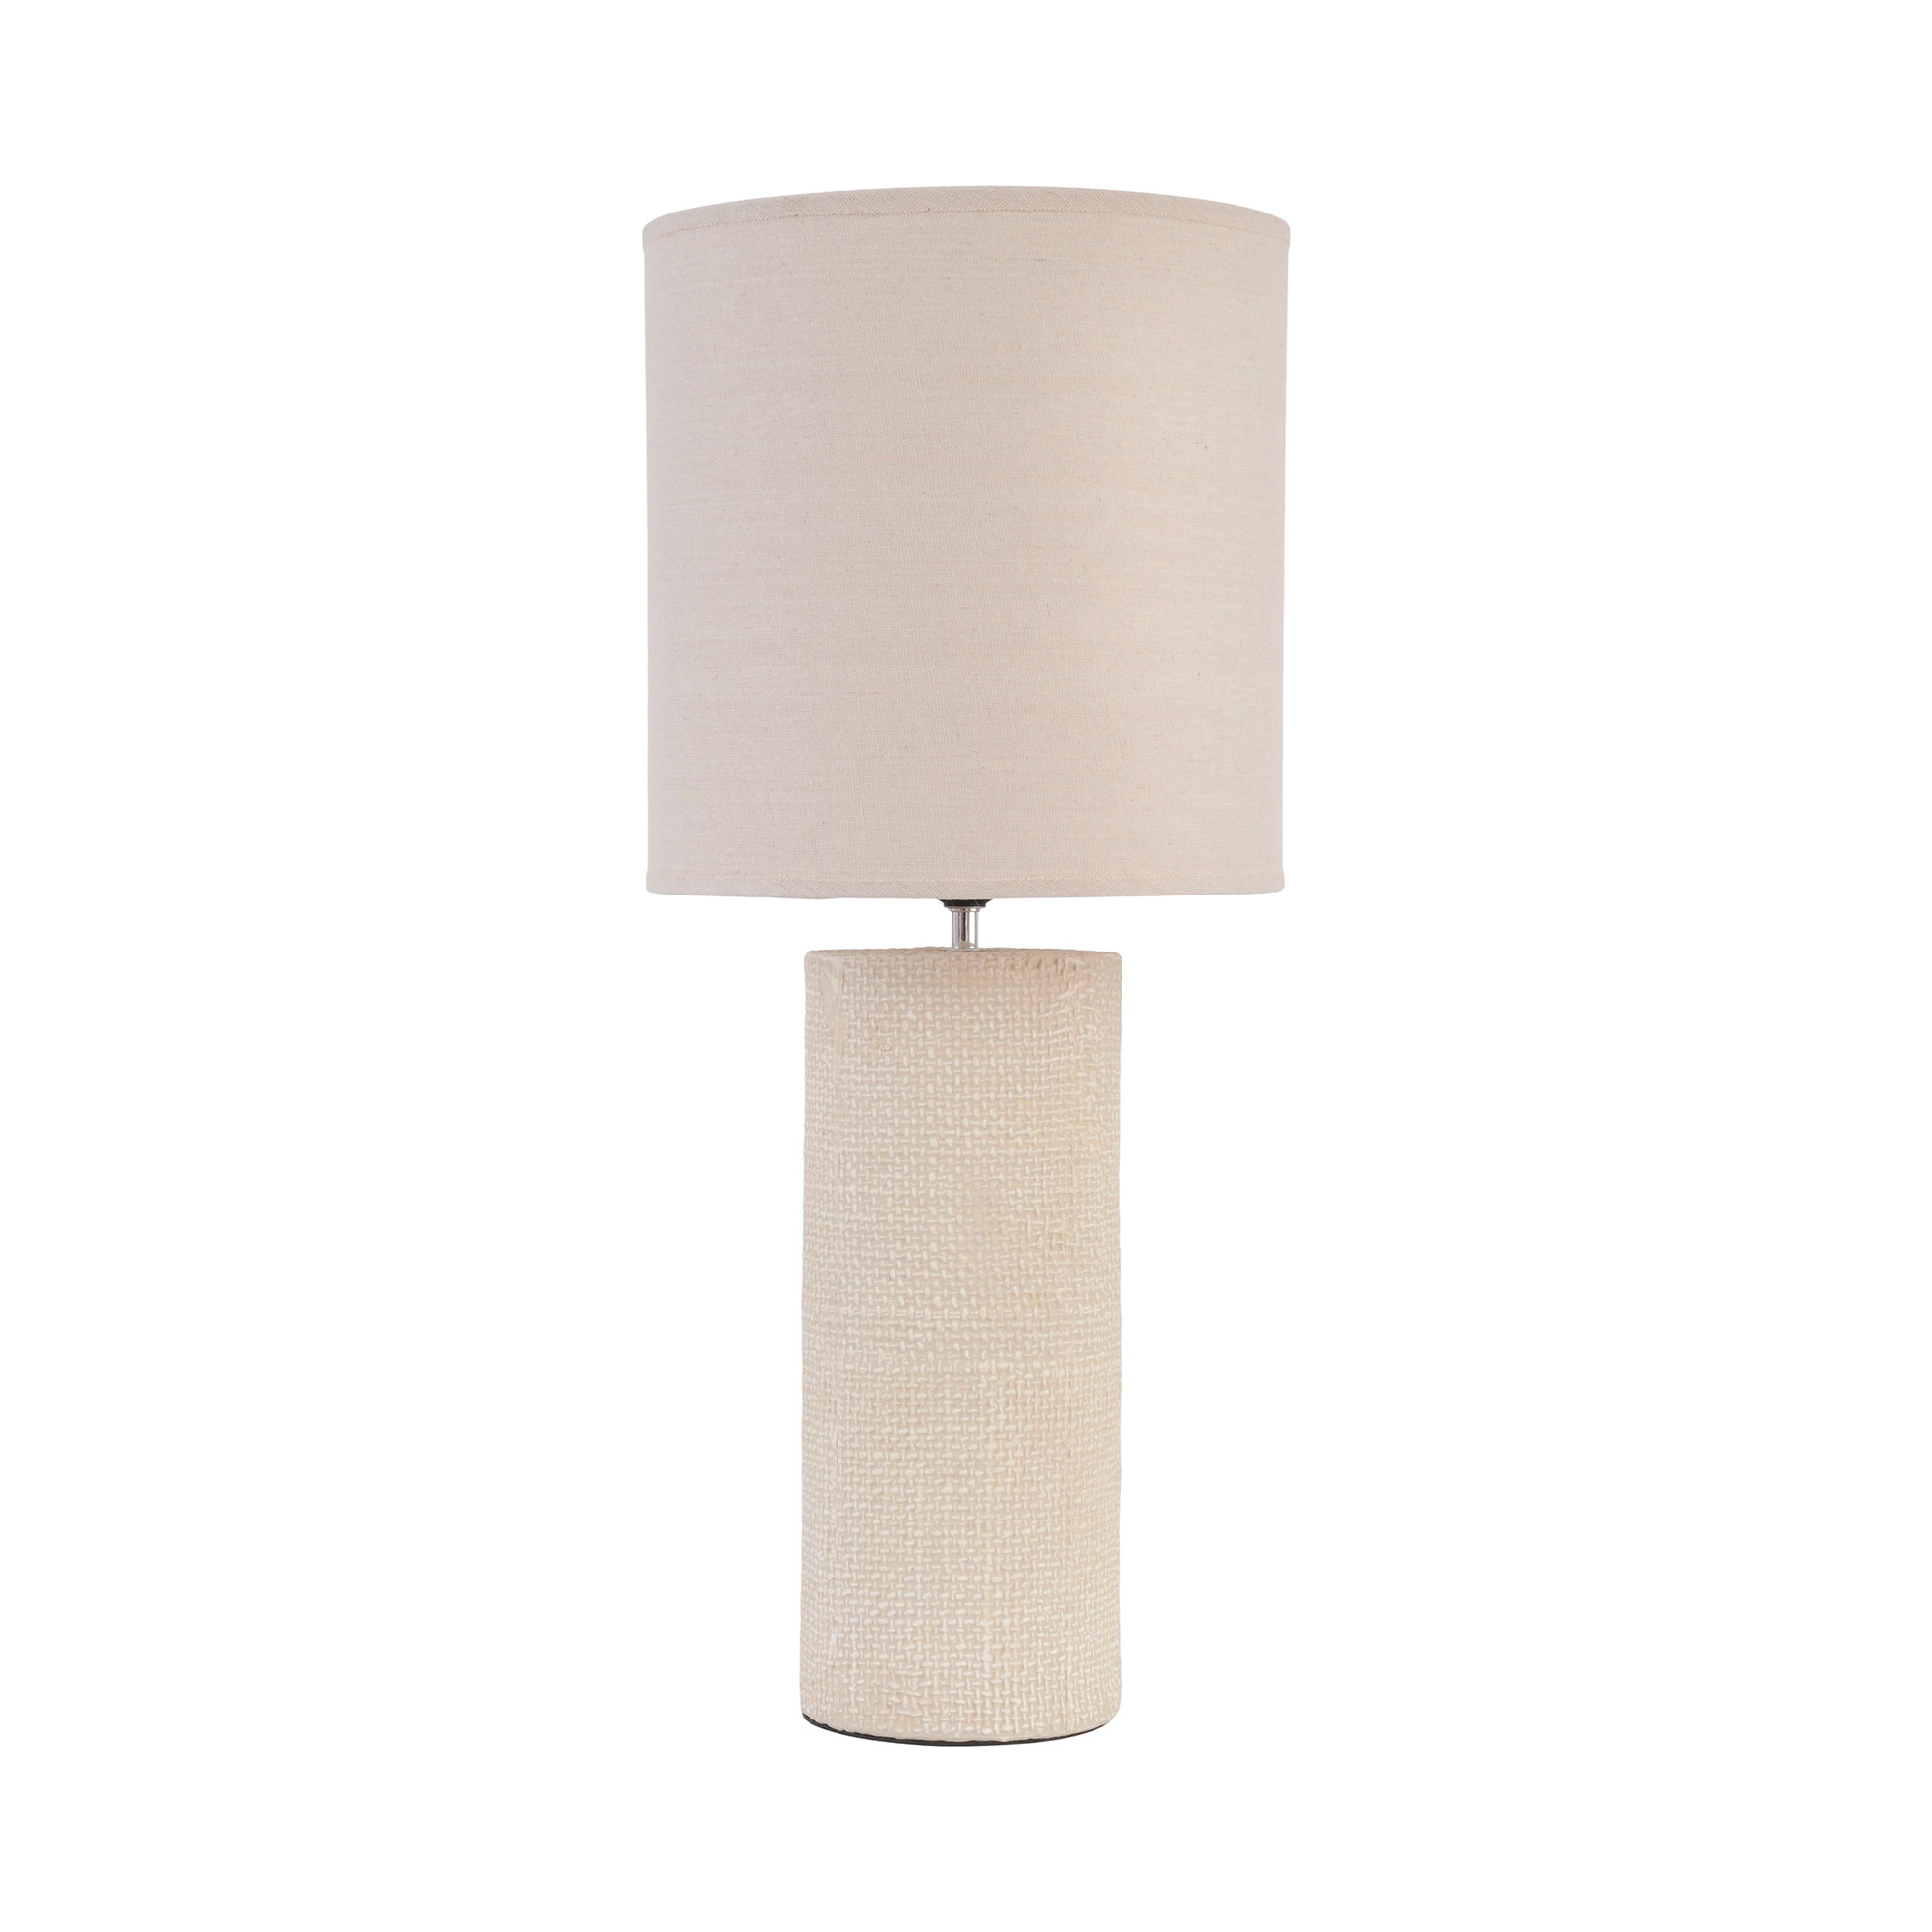 Toba Tall Cream Table Lamp All, Beige Table Lamp Textured